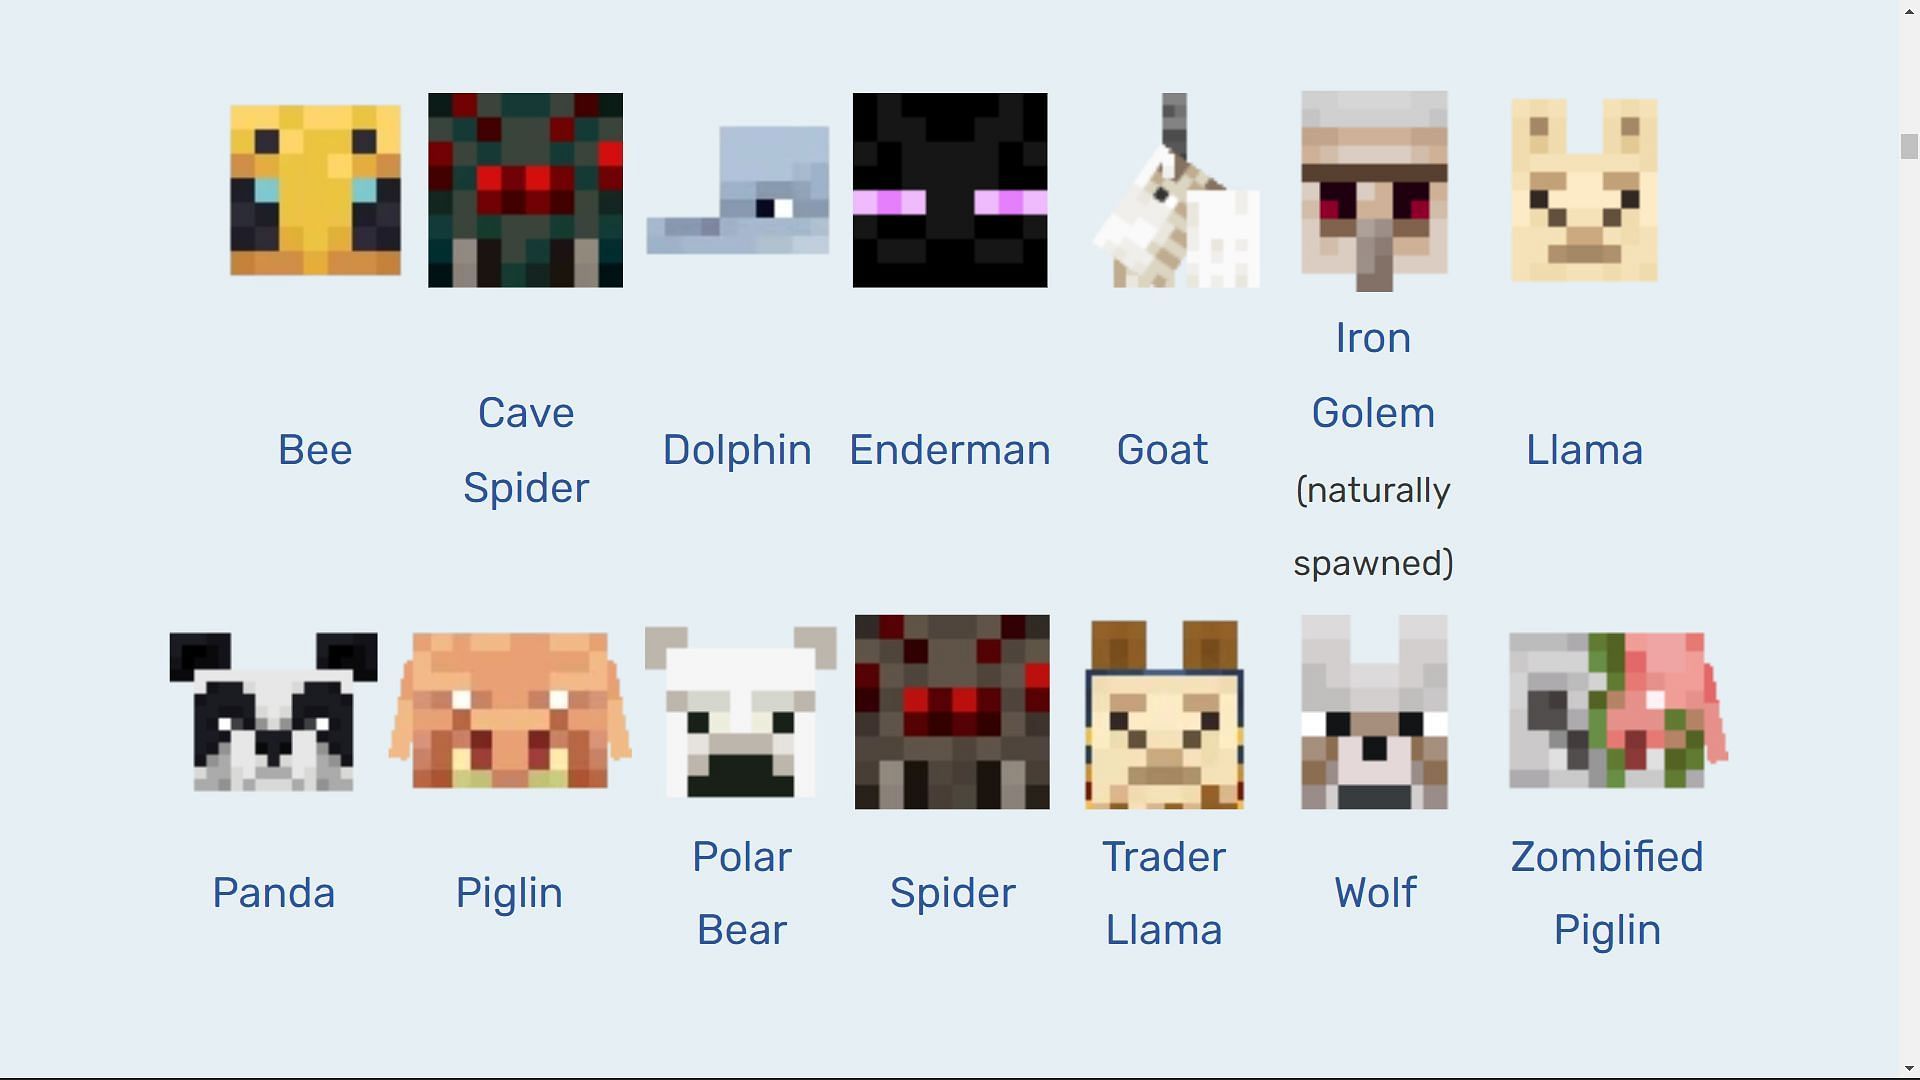 Most of the neutral mobs are untameable (Image via Minecraft Wiki)